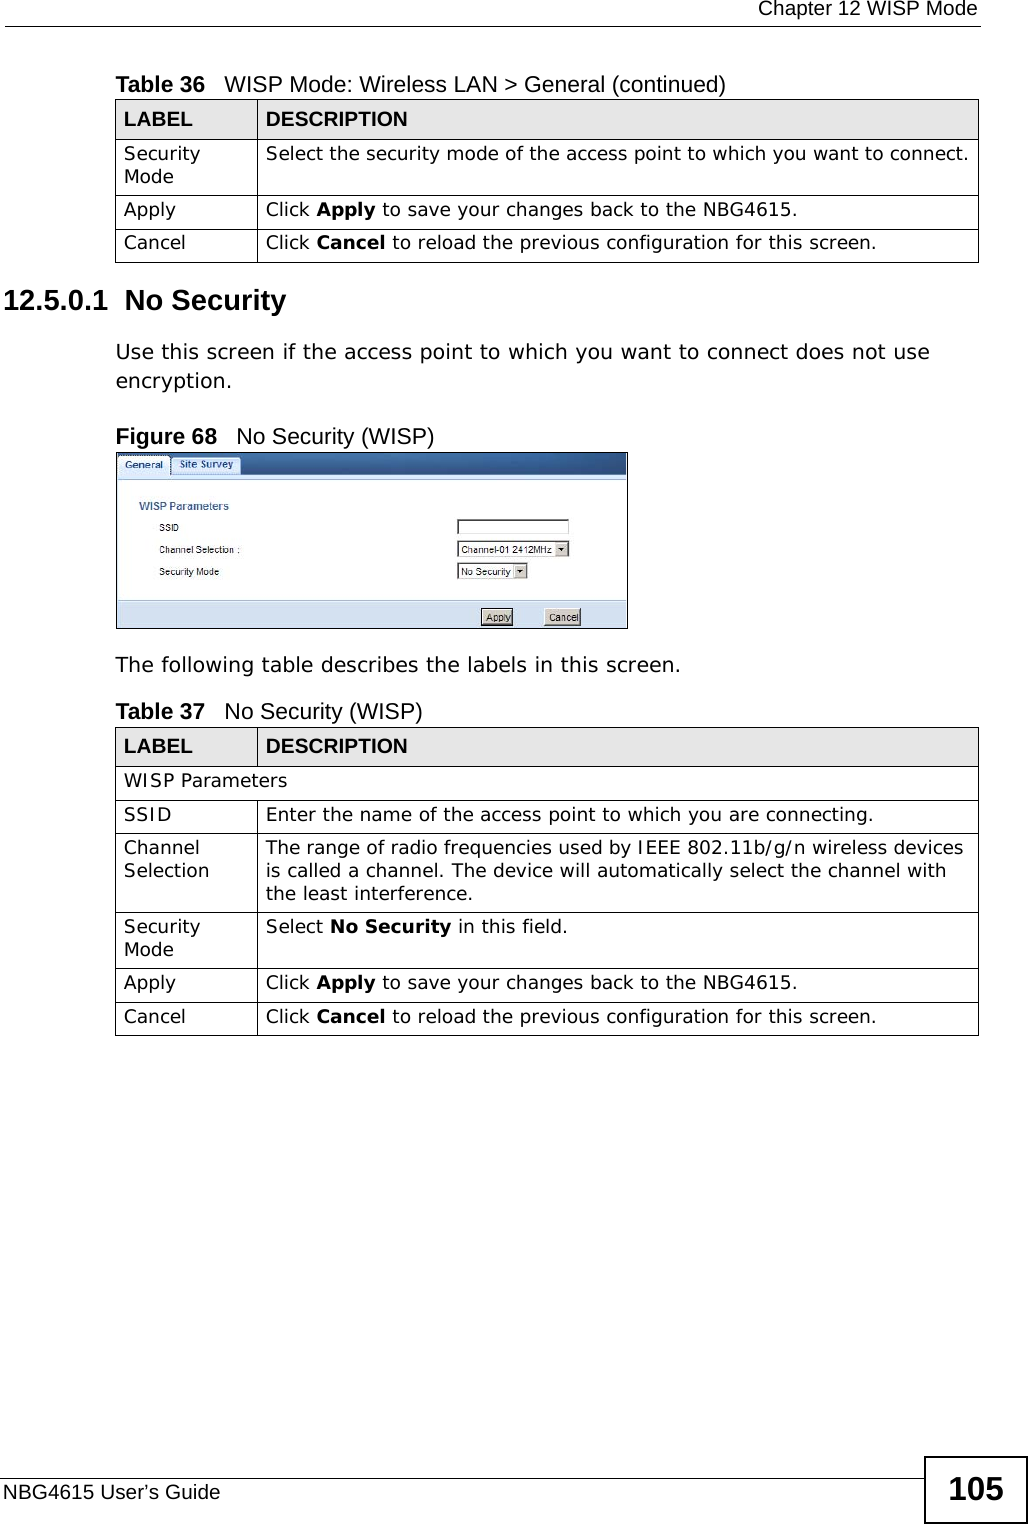  Chapter 12 WISP ModeNBG4615 User’s Guide 10512.5.0.1  No SecurityUse this screen if the access point to which you want to connect does not use encryption.Figure 68   No Security (WISP)The following table describes the labels in this screen. Security Mode Select the security mode of the access point to which you want to connect.Apply Click Apply to save your changes back to the NBG4615.Cancel Click Cancel to reload the previous configuration for this screen.Table 36   WISP Mode: Wireless LAN &gt; General (continued)LABEL  DESCRIPTIONTable 37   No Security (WISP)LABEL  DESCRIPTIONWISP ParametersSSID Enter the name of the access point to which you are connecting.Channel Selection The range of radio frequencies used by IEEE 802.11b/g/n wireless devices is called a channel. The device will automatically select the channel with the least interference.Security Mode Select No Security in this field.Apply Click Apply to save your changes back to the NBG4615.Cancel Click Cancel to reload the previous configuration for this screen.